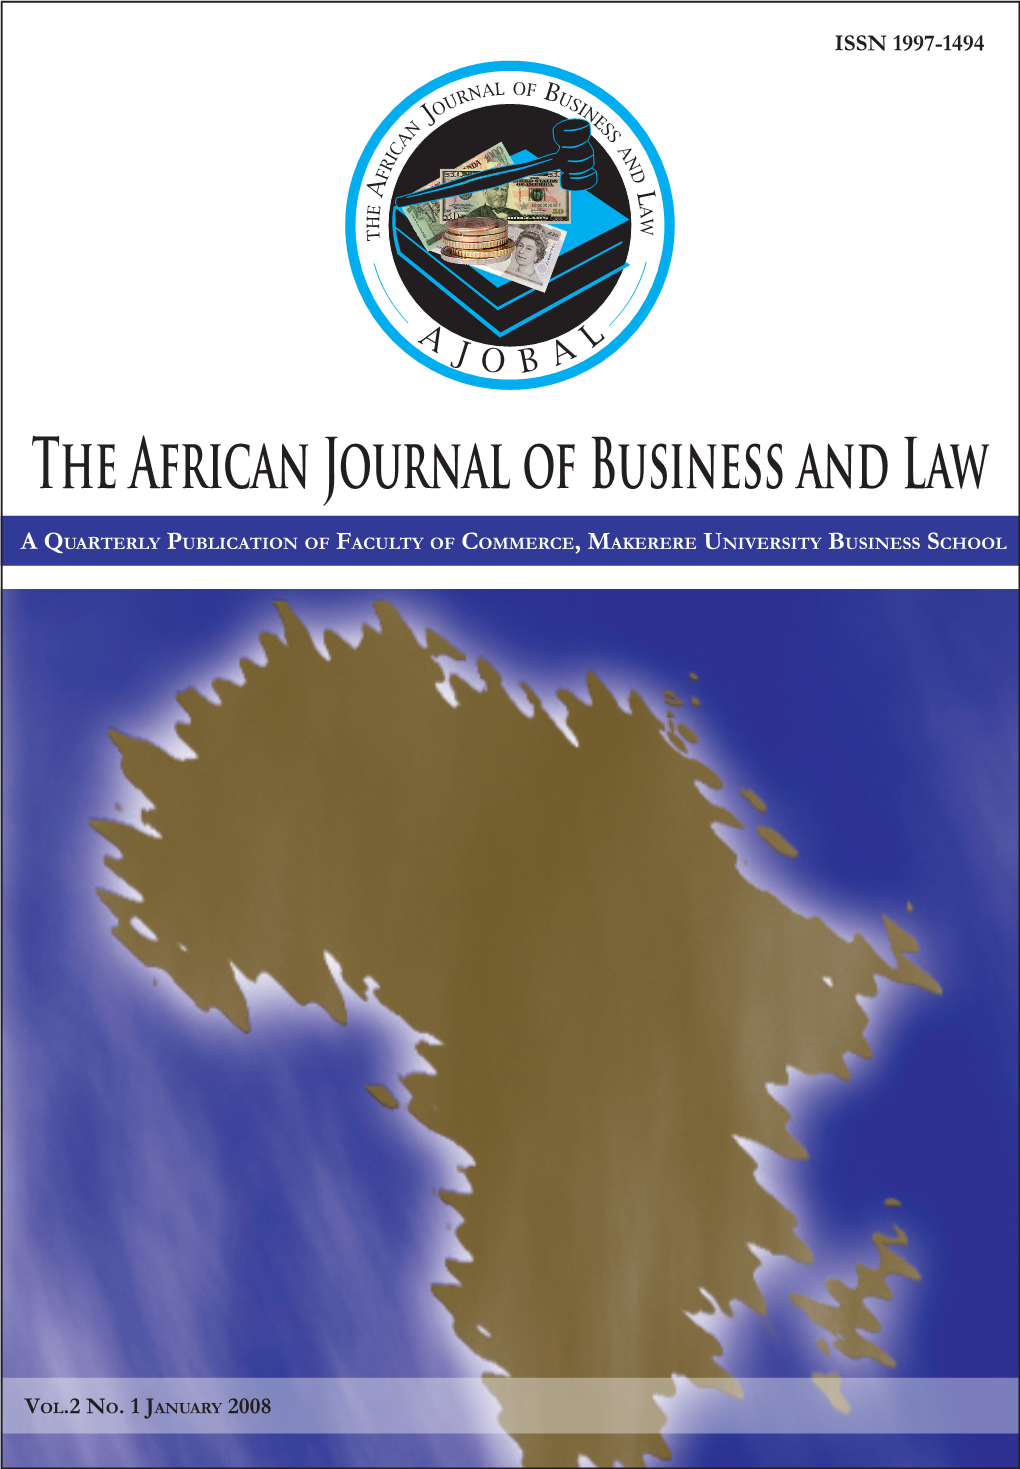 The African Journal of Business and Law